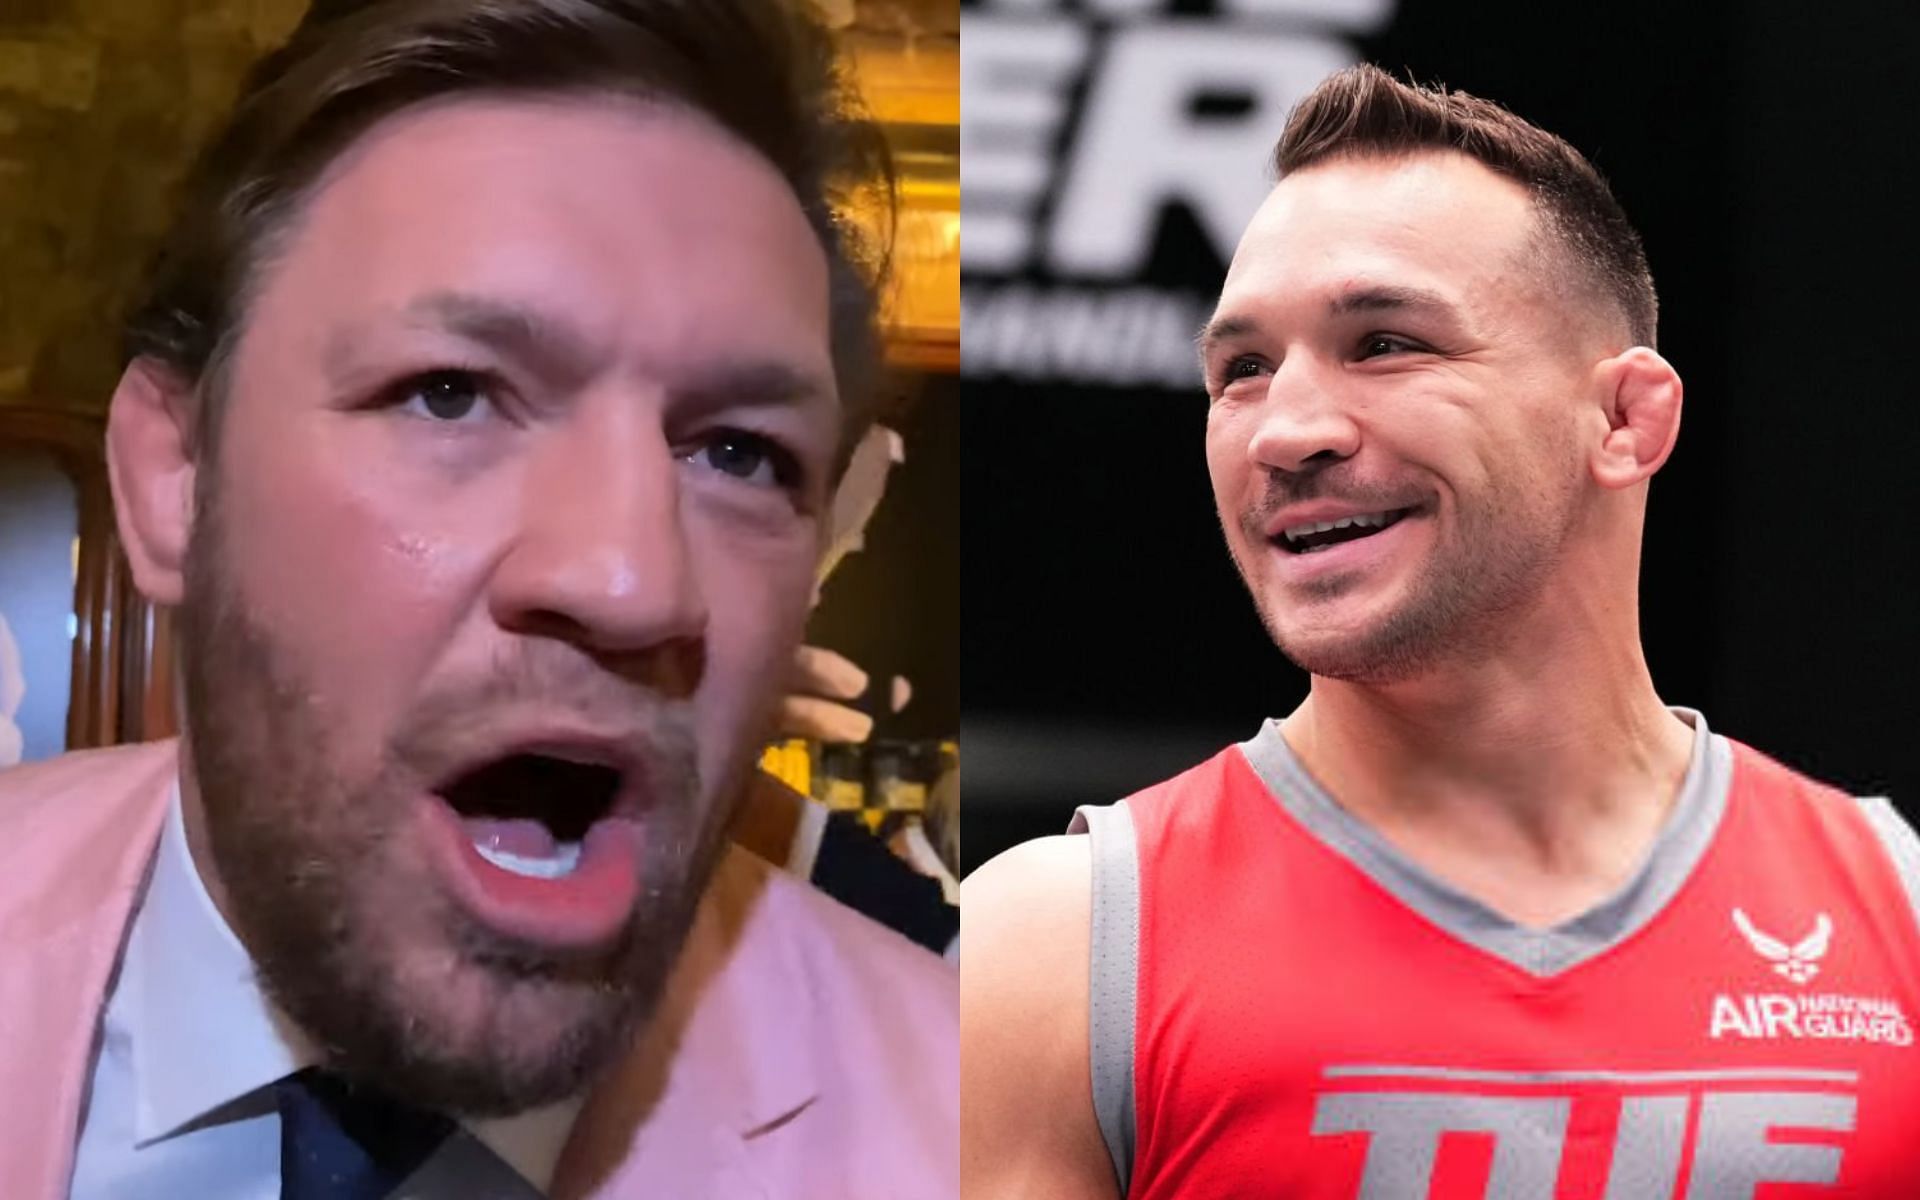 Conor McGregor (left) and Michael Chandler (right) [Images Courtesy: @alloutfighting on YouTube and @GettyImages]